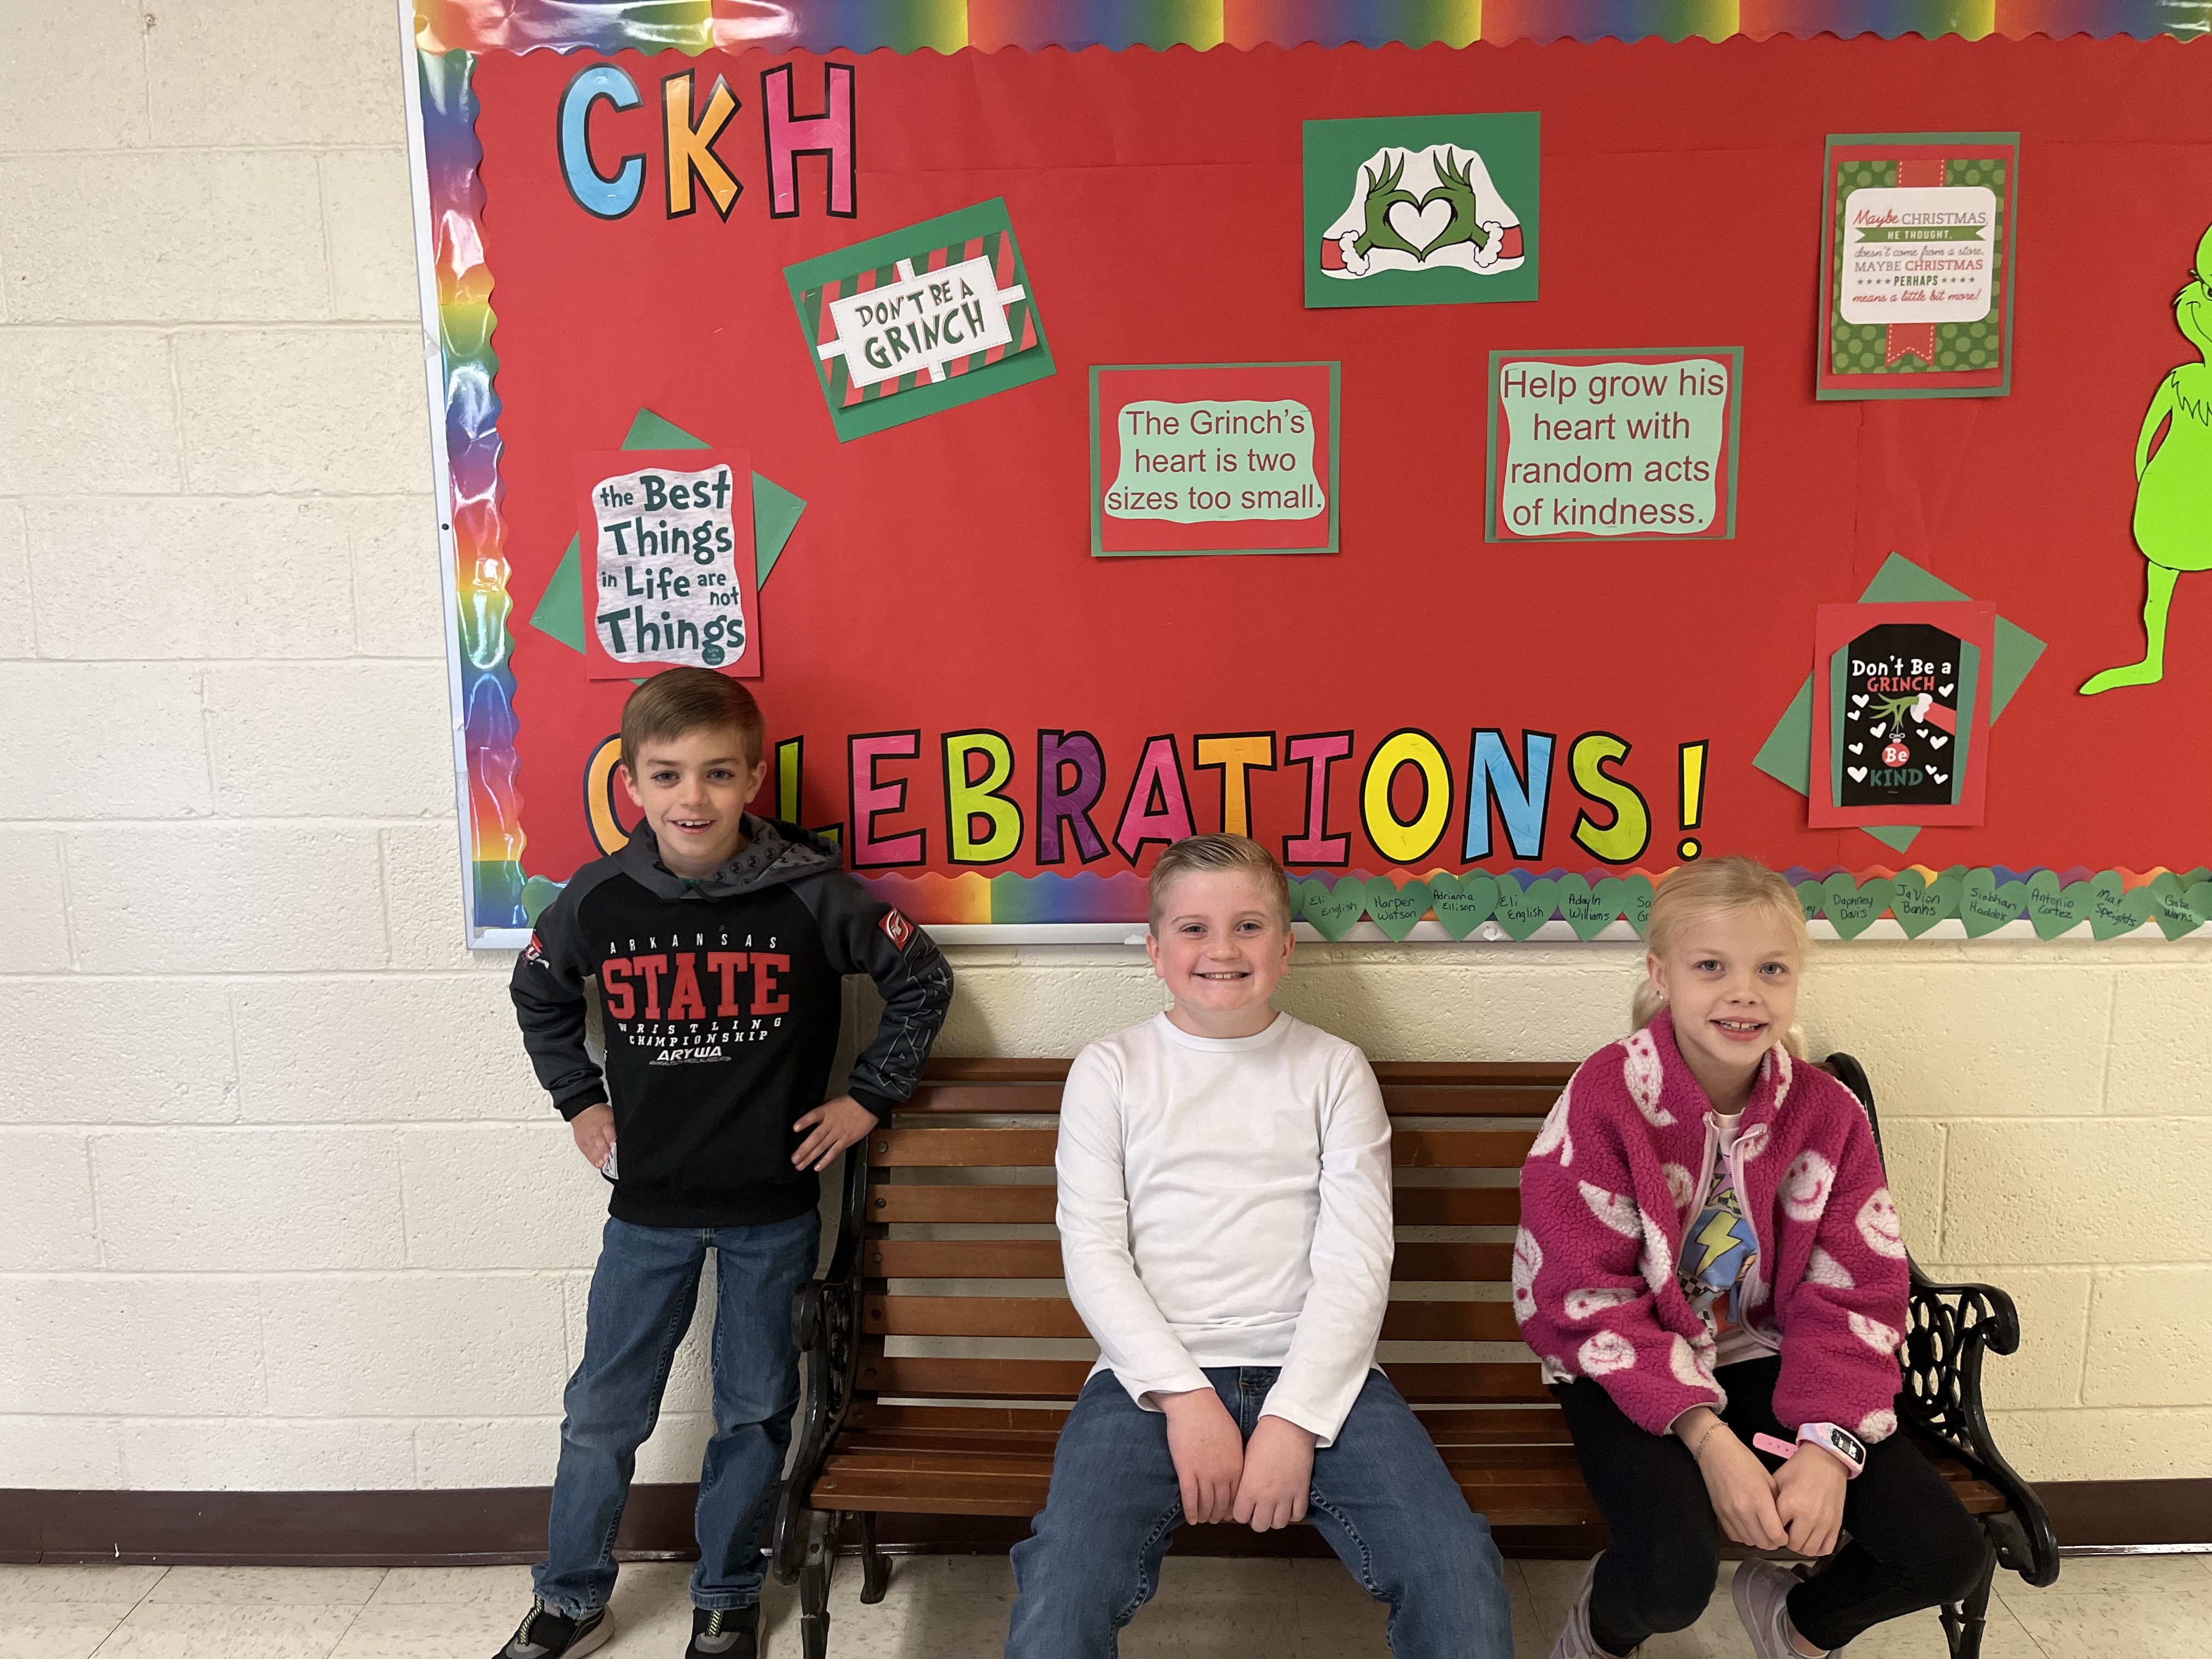 3rd grade winners smiling for the camera in front of a red bulletin board